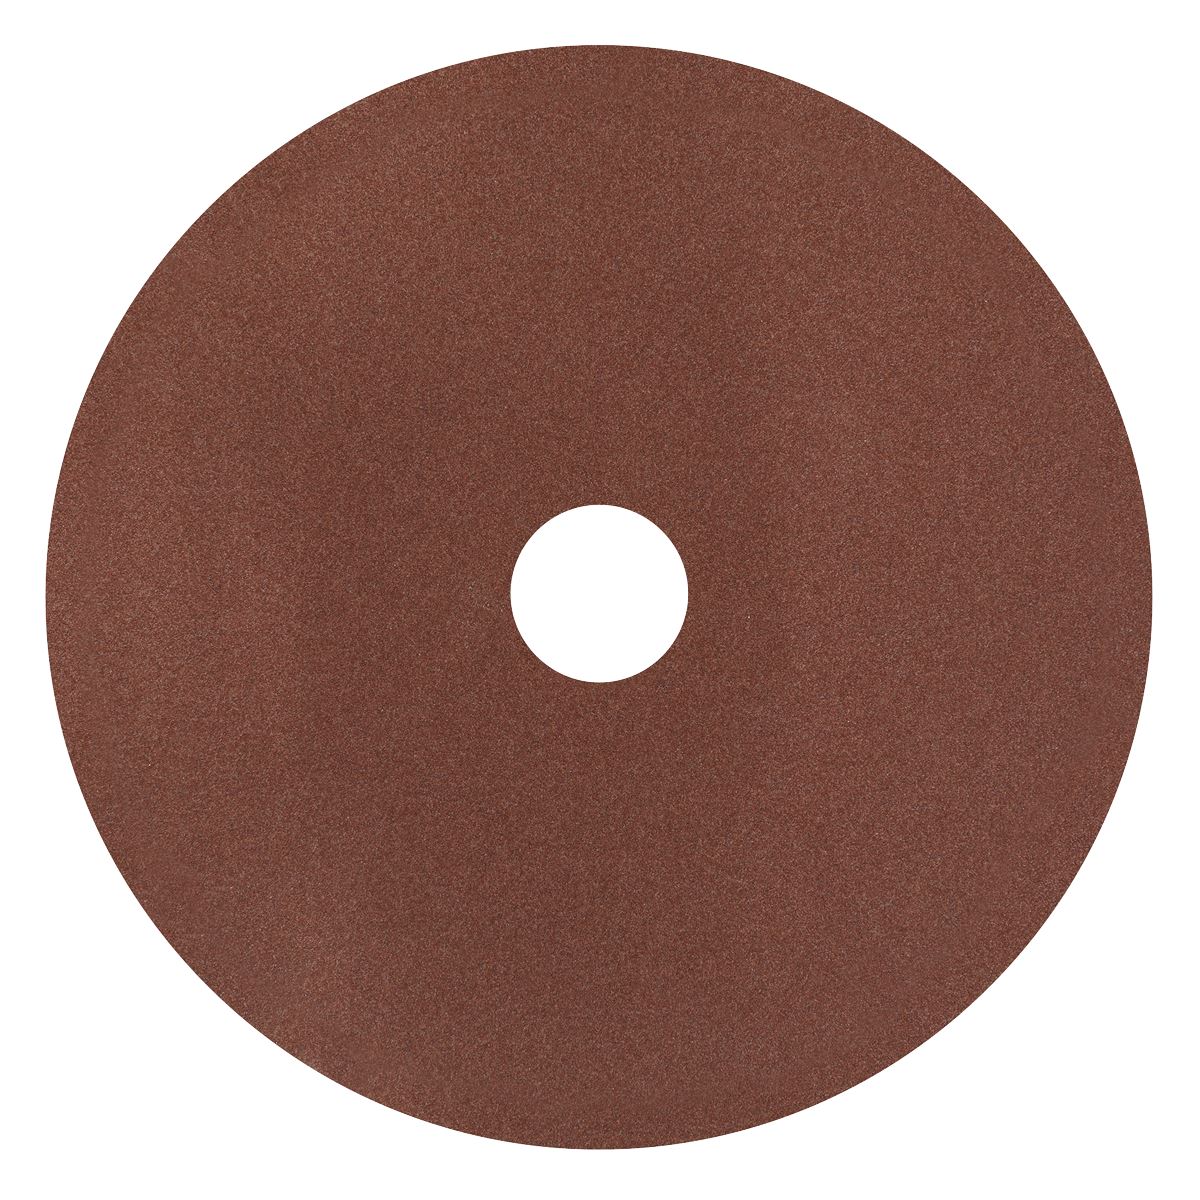 Worksafe by Sealey Fibre Backed Disc Ø100mm - 120Grit Pack of 25